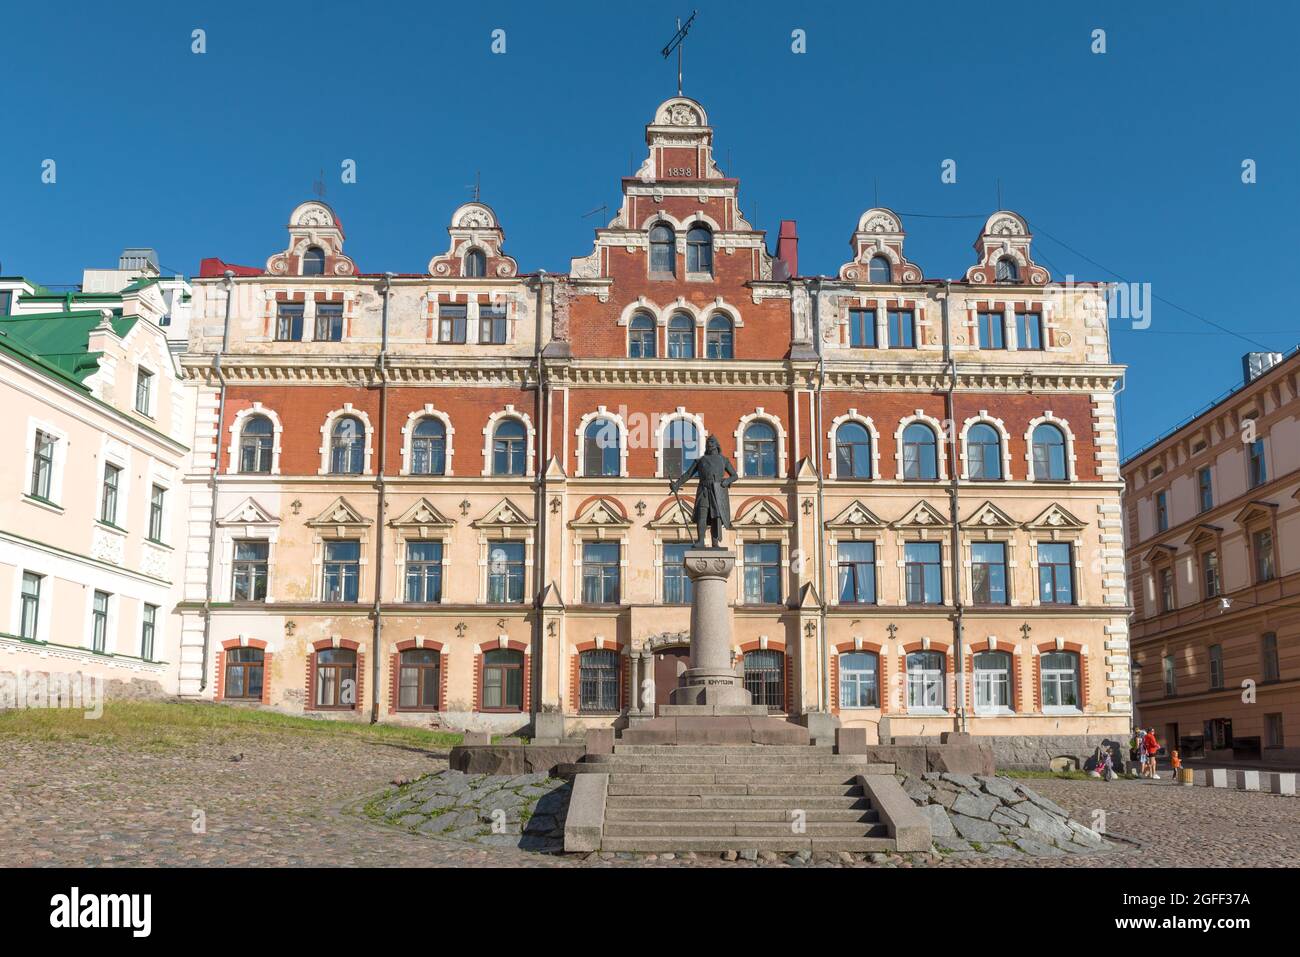 VYBORG, RUSSIA - AUGUST 04, 2021: View of the Old Town Hall building on a sunny August day Stock Photo